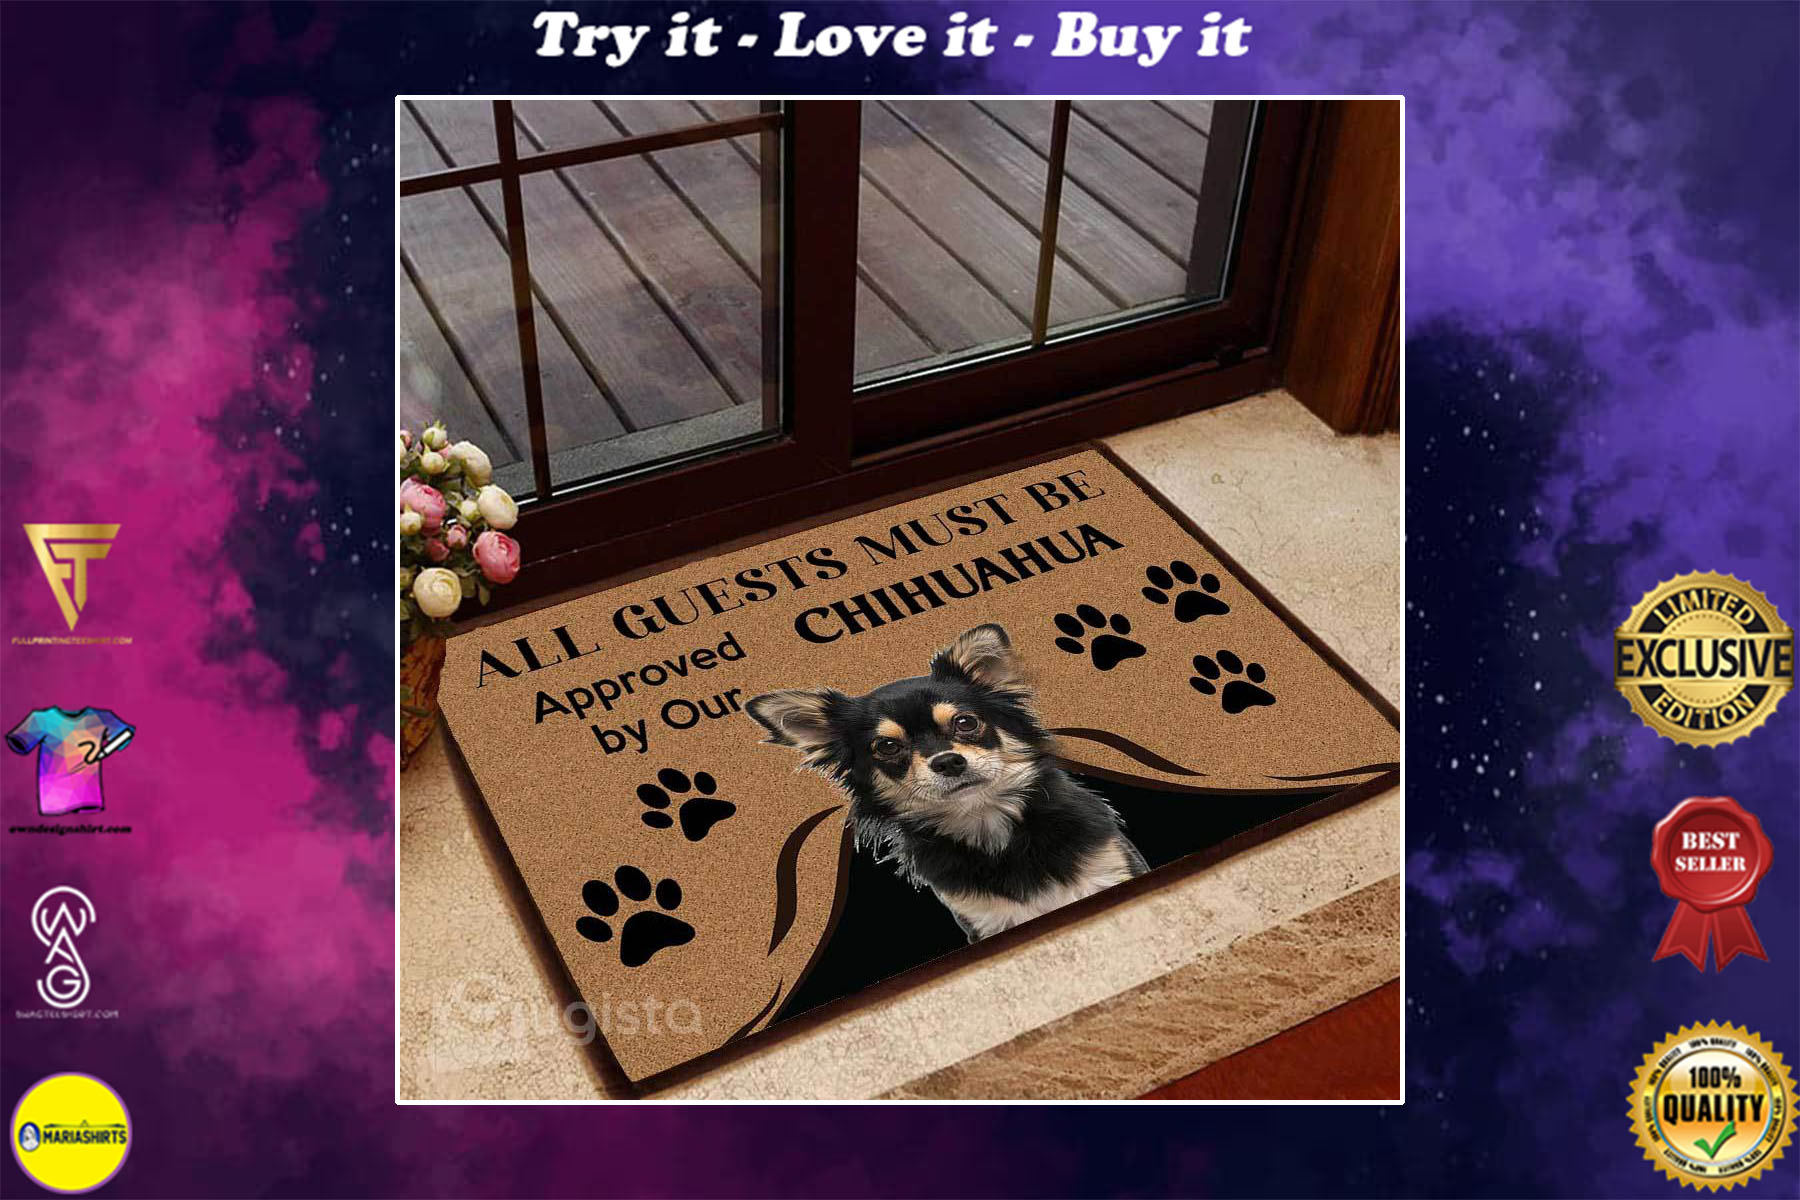 all guests must be approved by our chihuahua doormat